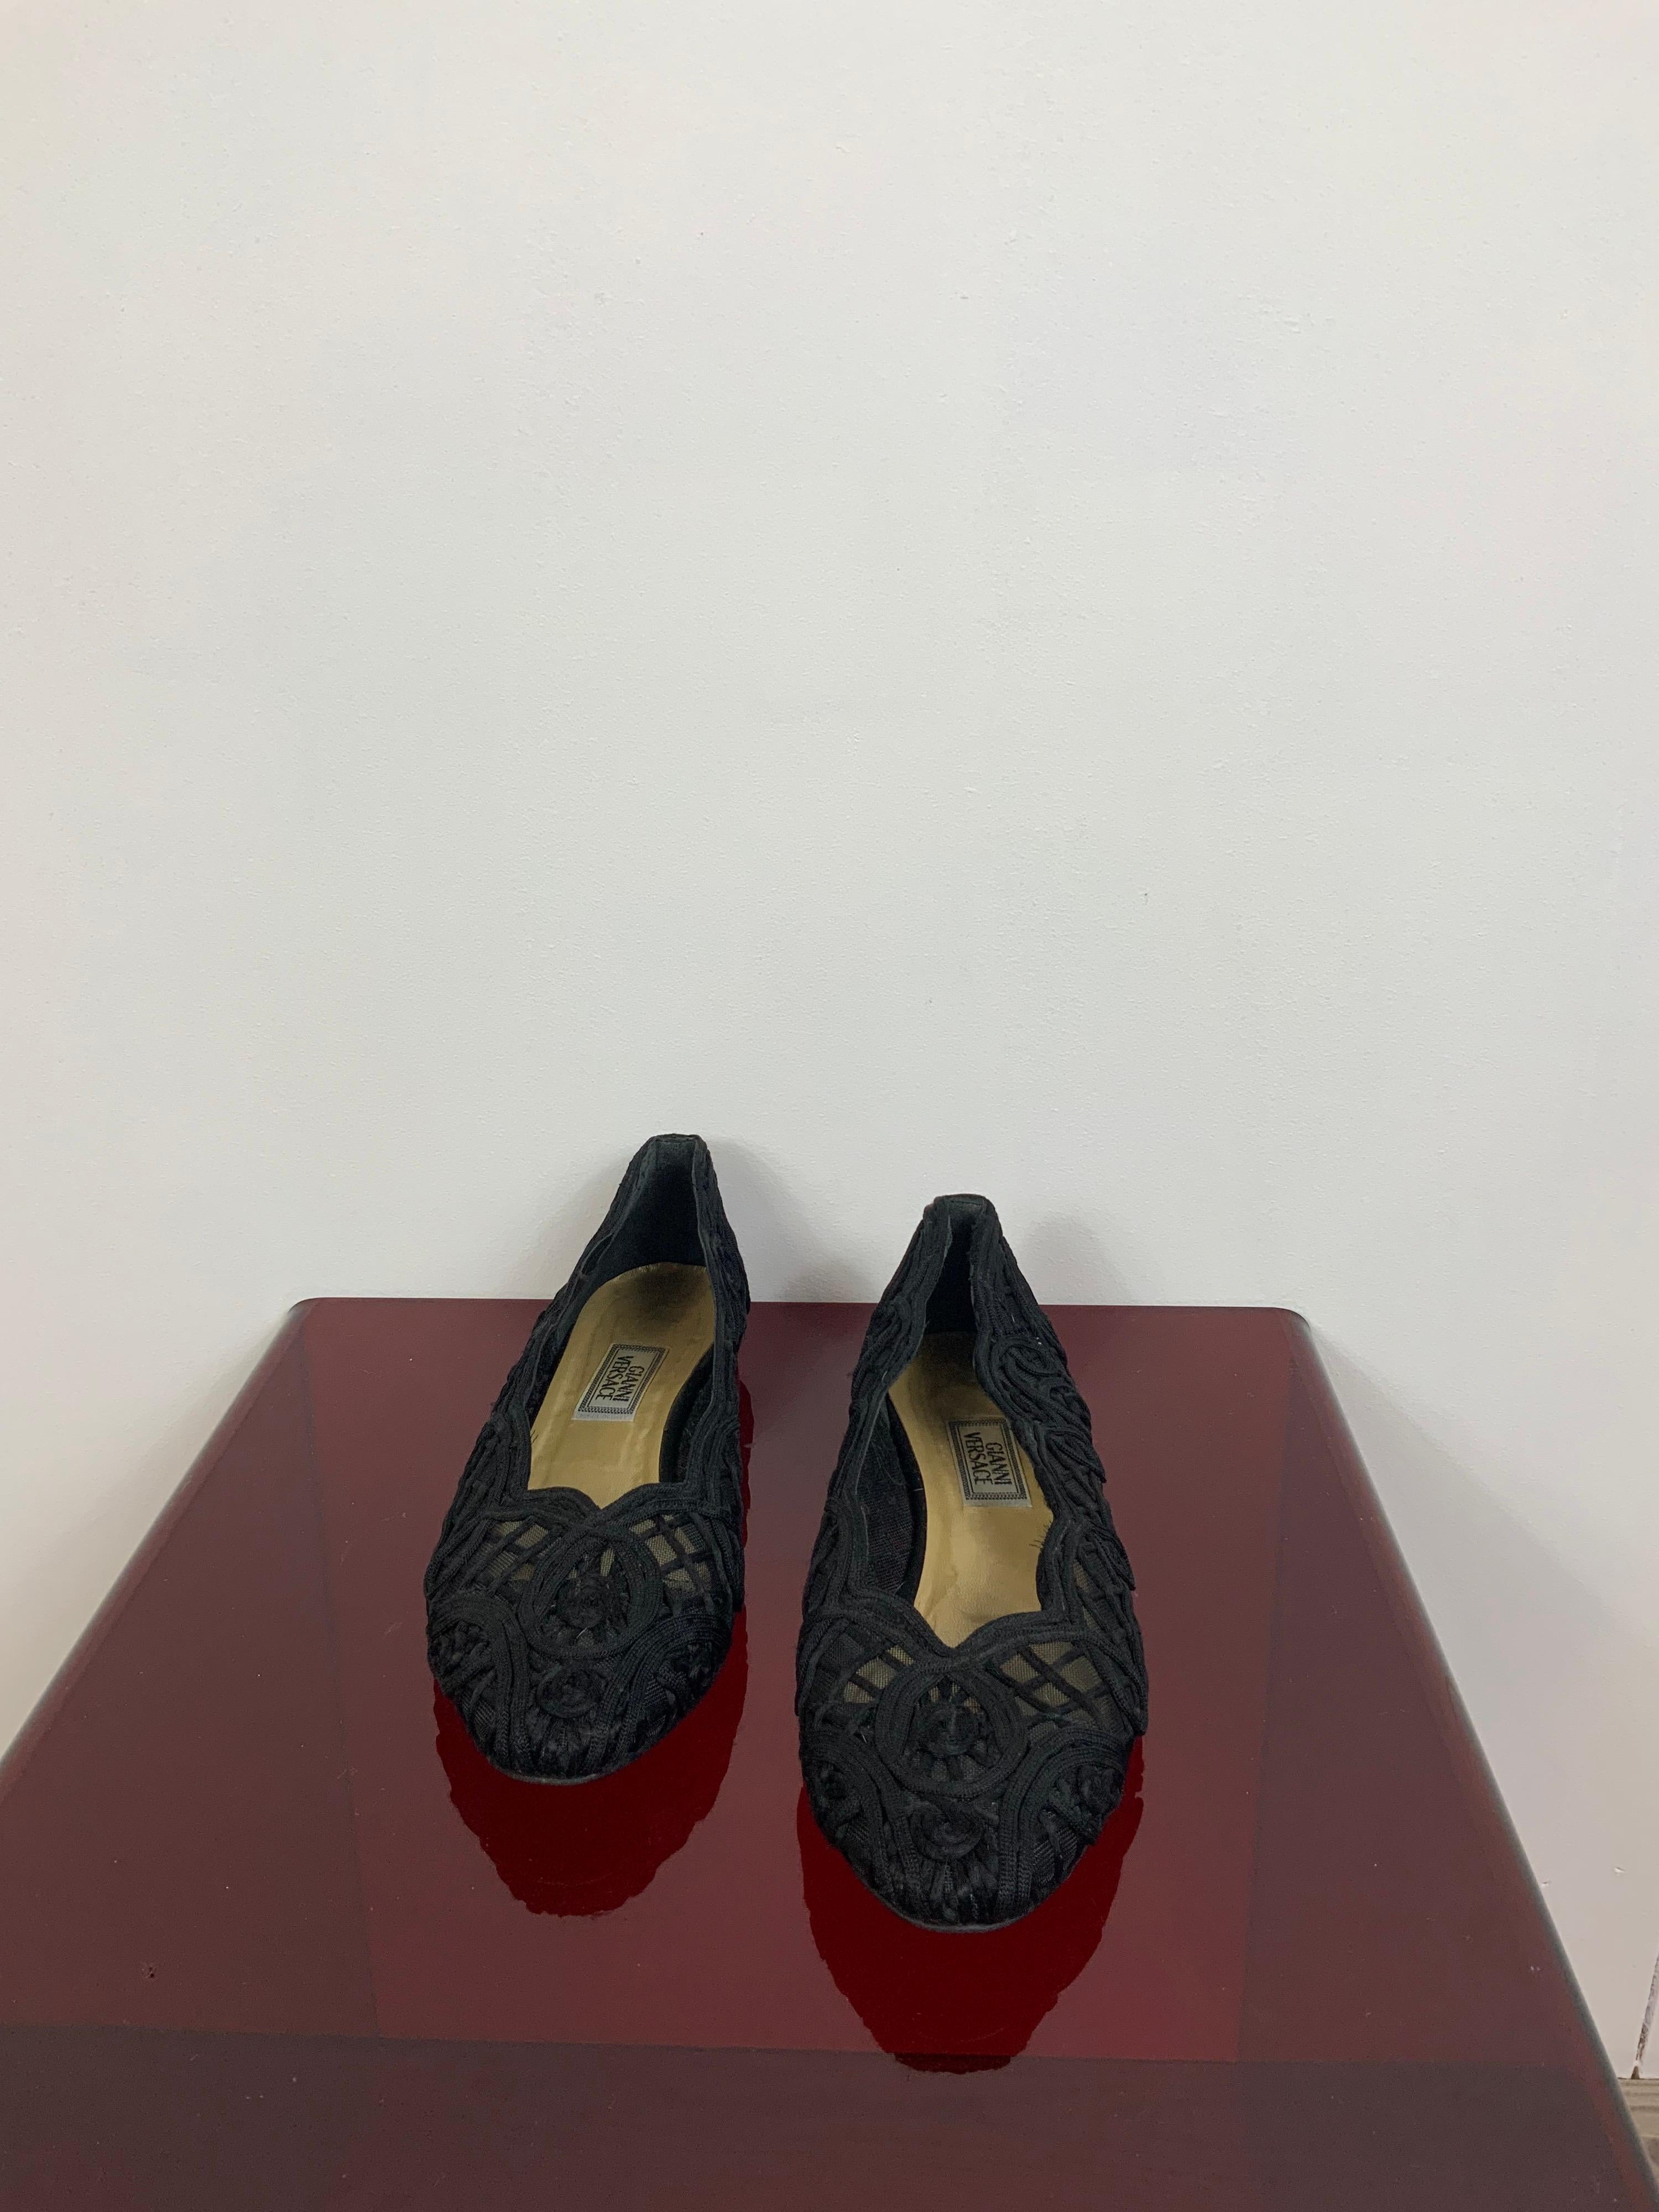 Gianni Versace Ballerinas.
Fabric feels like a mix between silk and a thick net.
Material is semitransparent.
Size 39 Italian.
Interior sole: 25 cm
Heels: 1,5 cm
Conditions: Good - Previously owned and gently worn, with little signs of use. May show